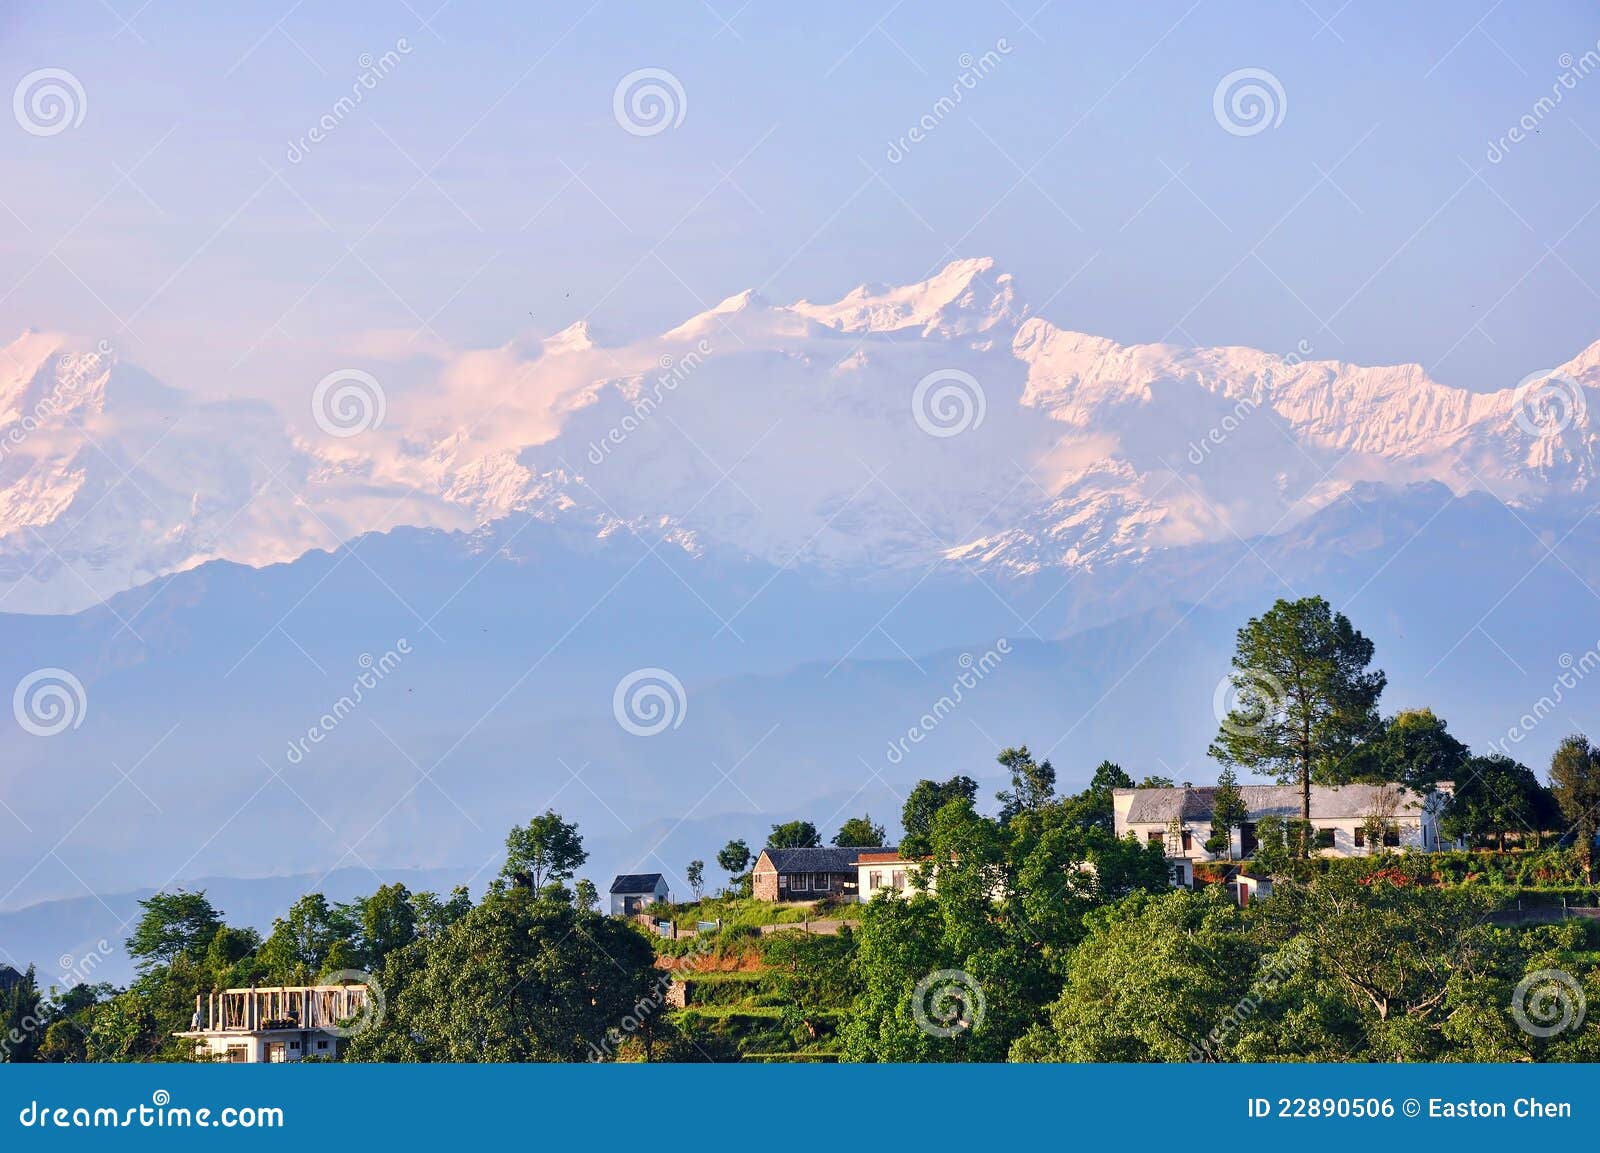 Nepal's natural beauty, snow-capped mountains of the town.